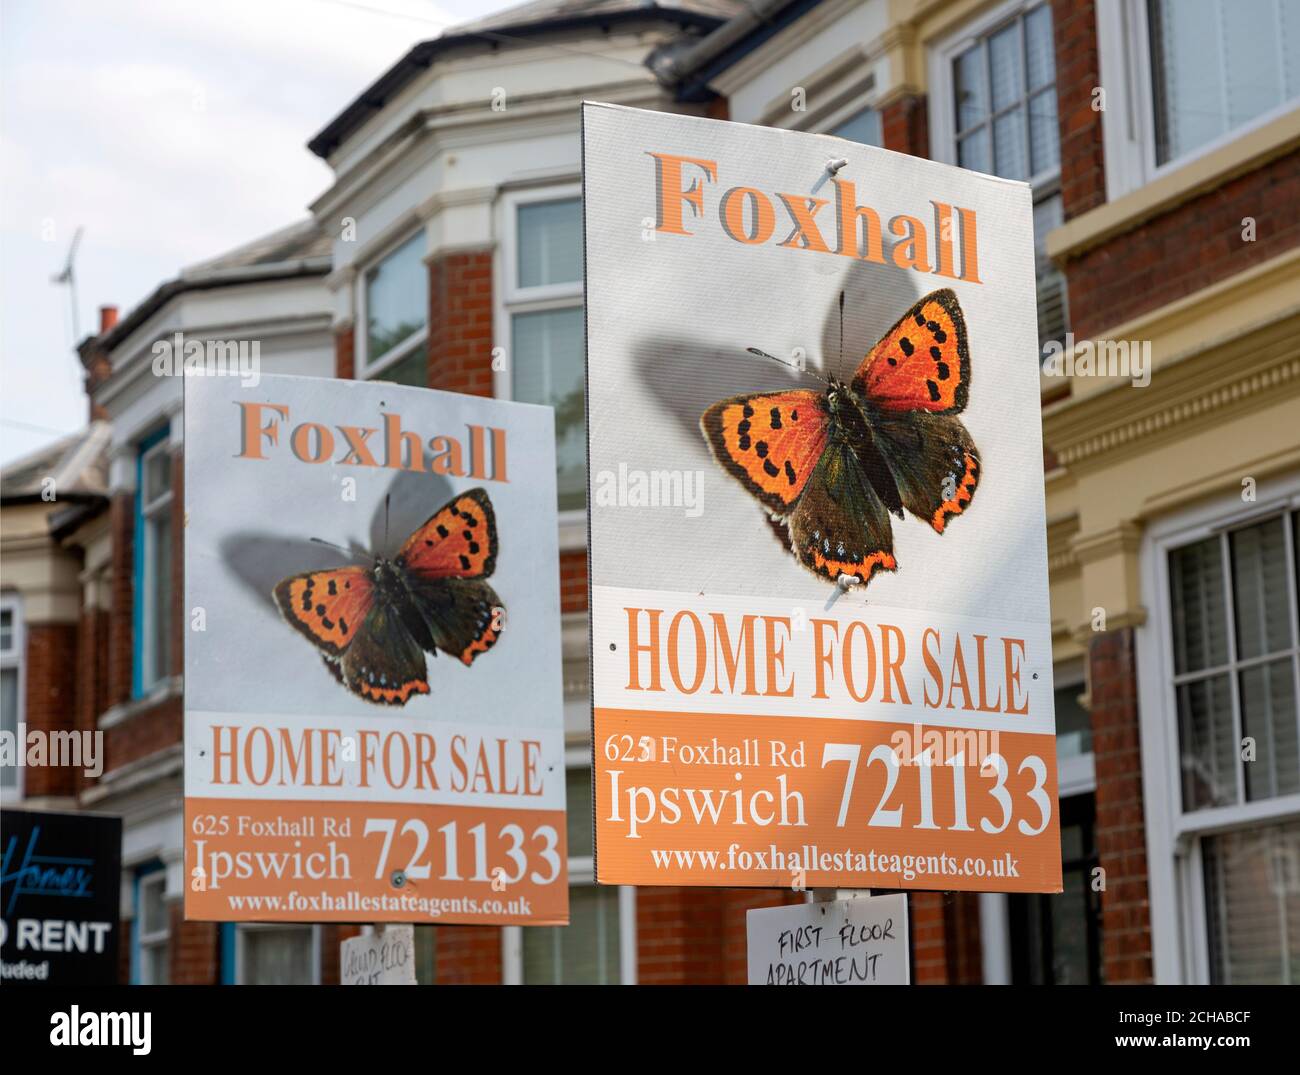 Estate agent signs for apartment flats for sale, Spring Road, Ipswich, Suffolk, England, UK Stock Photo